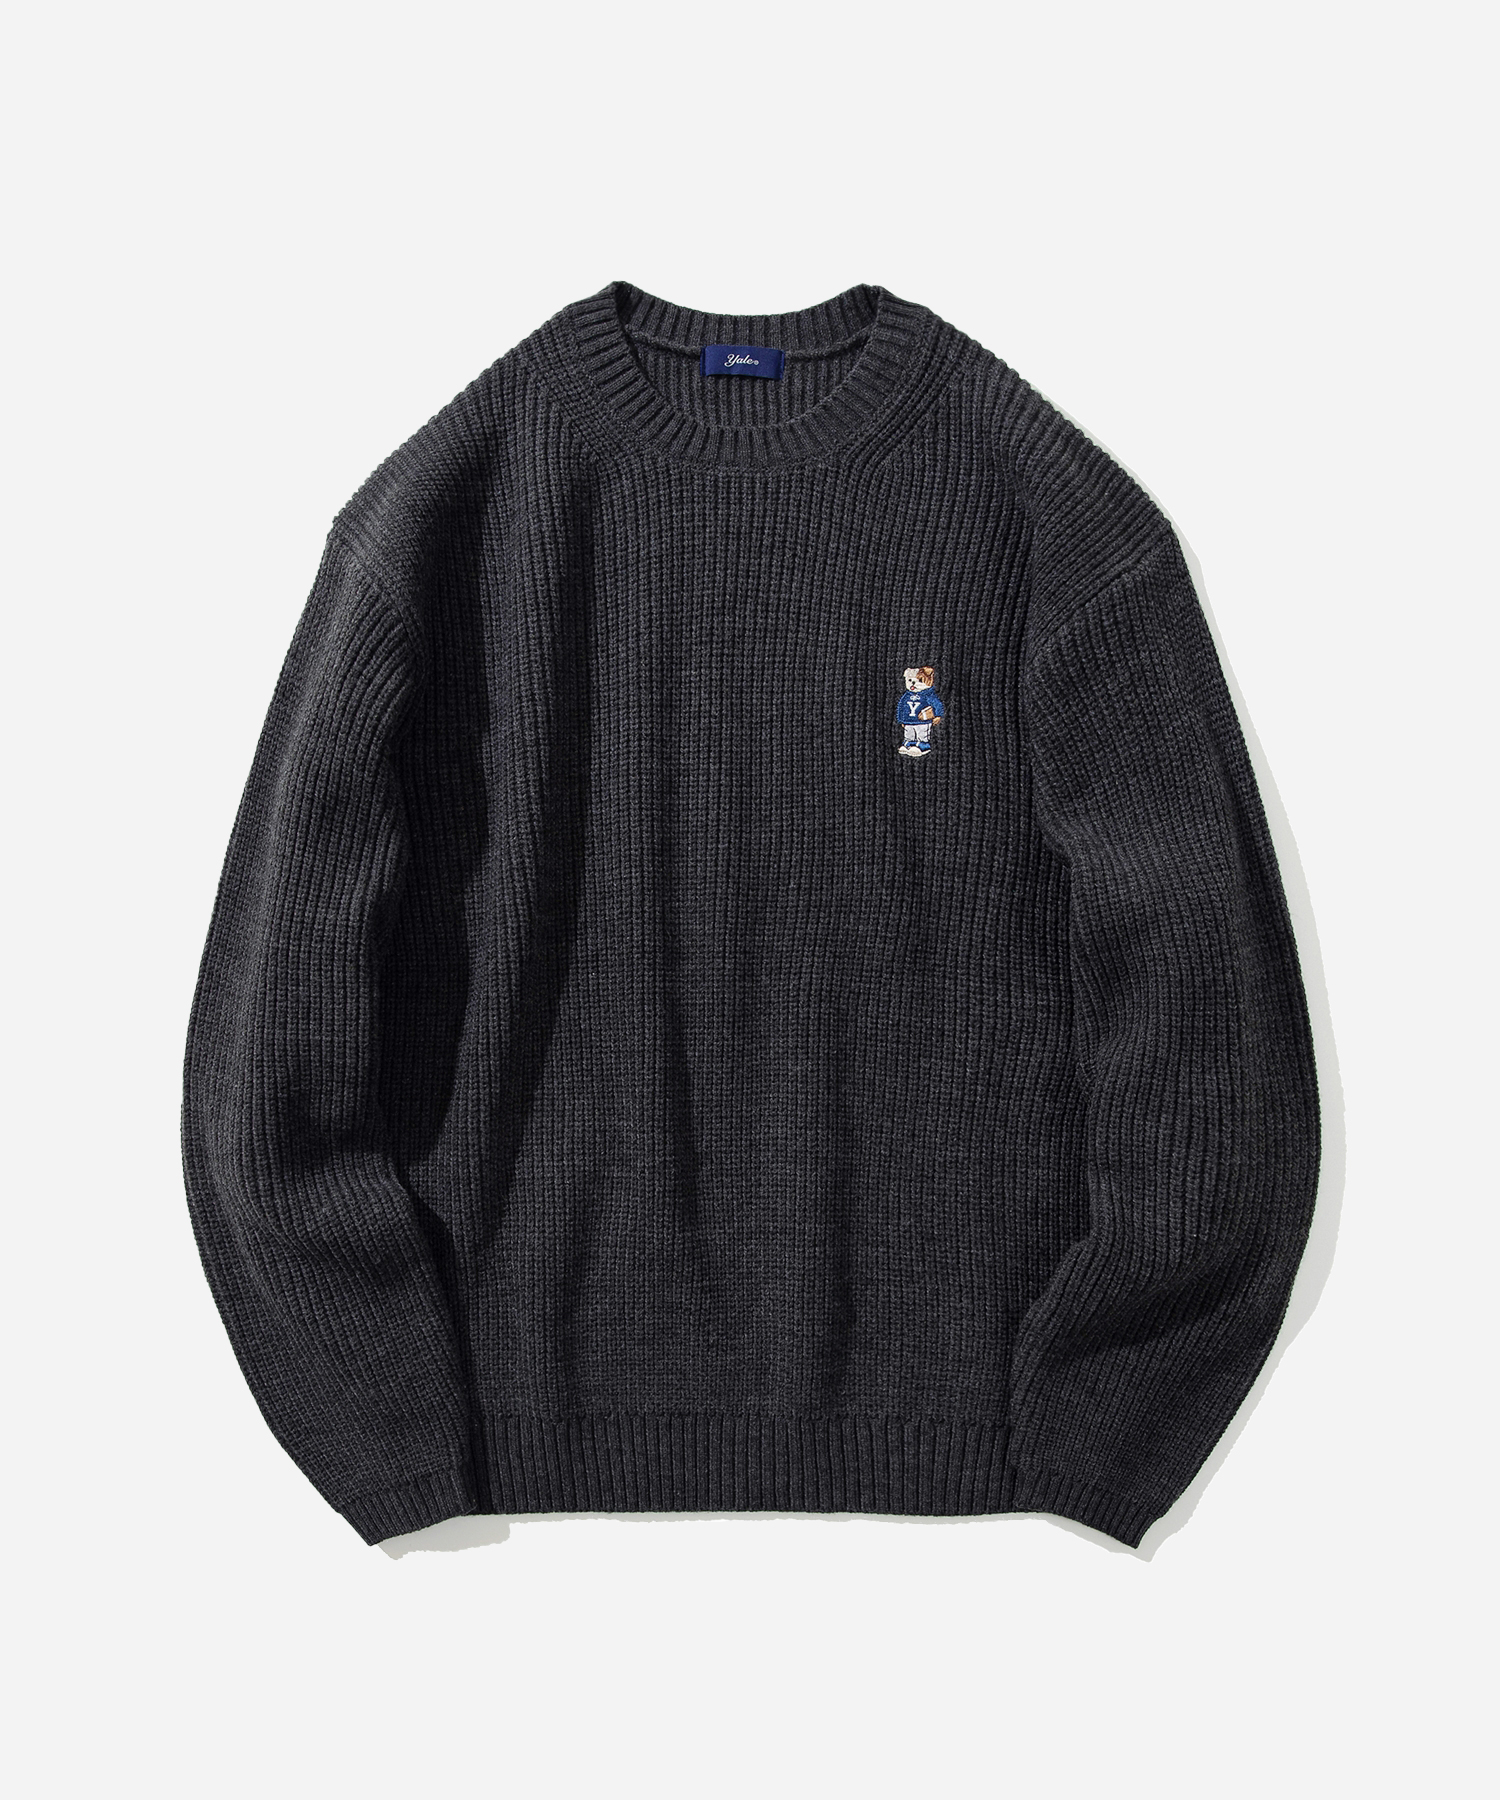 EMBROIDERY DAN 7 GAUGE CREW NECK KNIT CHARCOAL